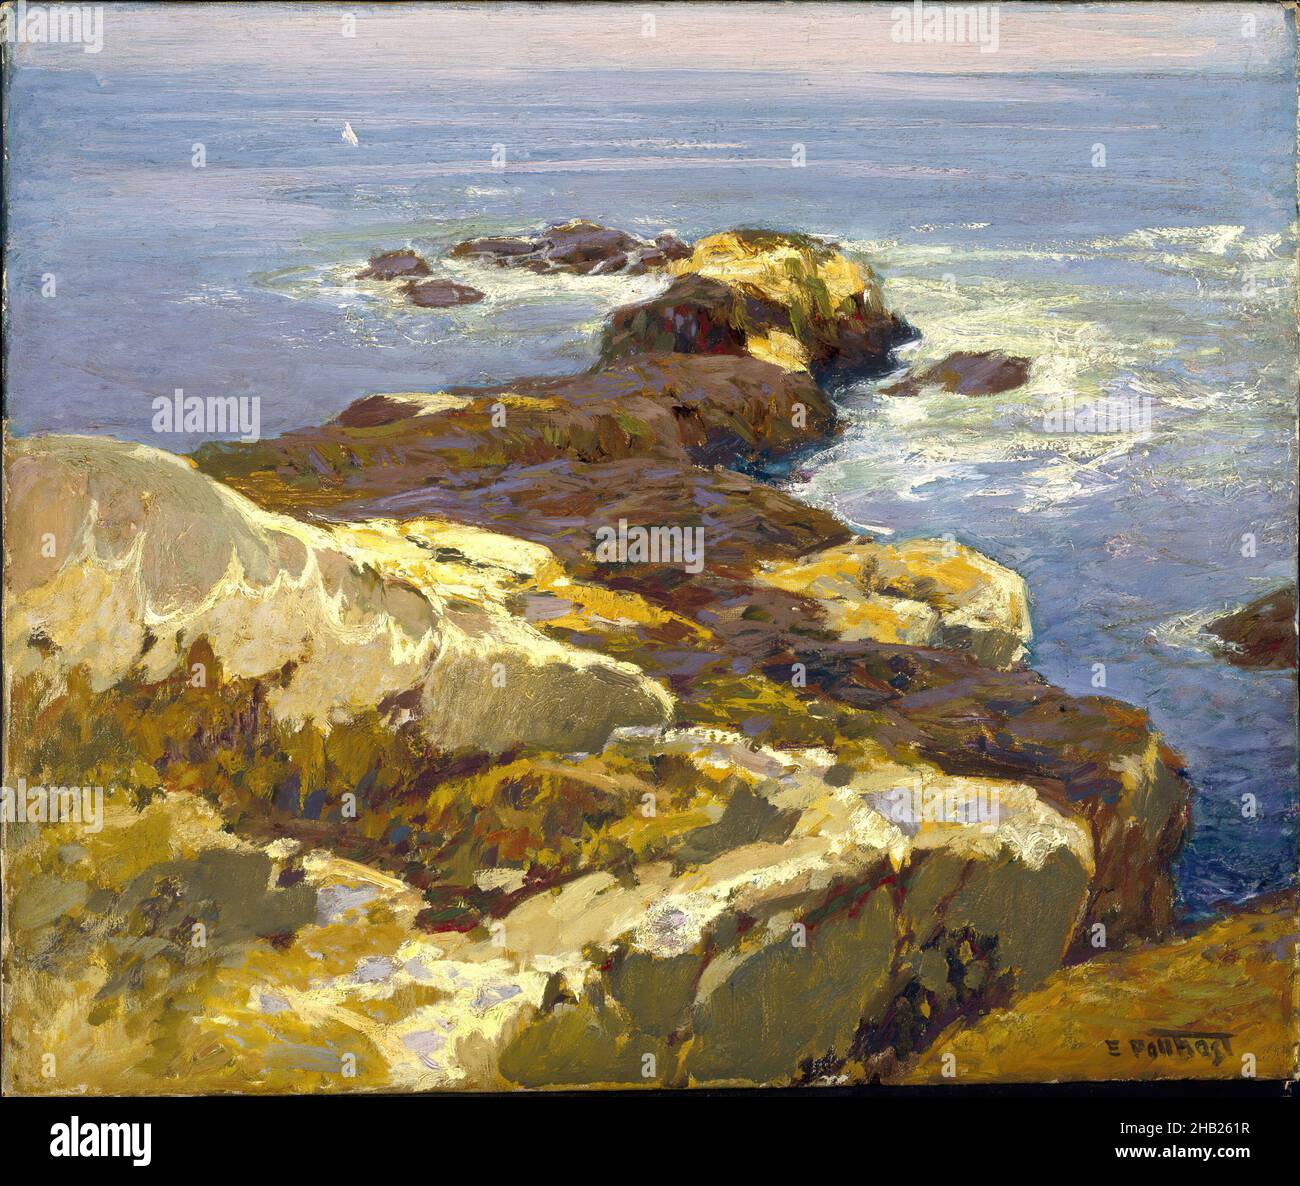 Rocks and Sea, Edward Henry Potthast, American, 1857-1927, Oil on canvas, ca. 1923, 20 1/16 x 24 in., 51 x 61 cm, American Painting, boulders, ca. 1923, coastline, marine, ndd7, ocean, oil on canvas, painting, rocks, sea, seascape Stock Photo